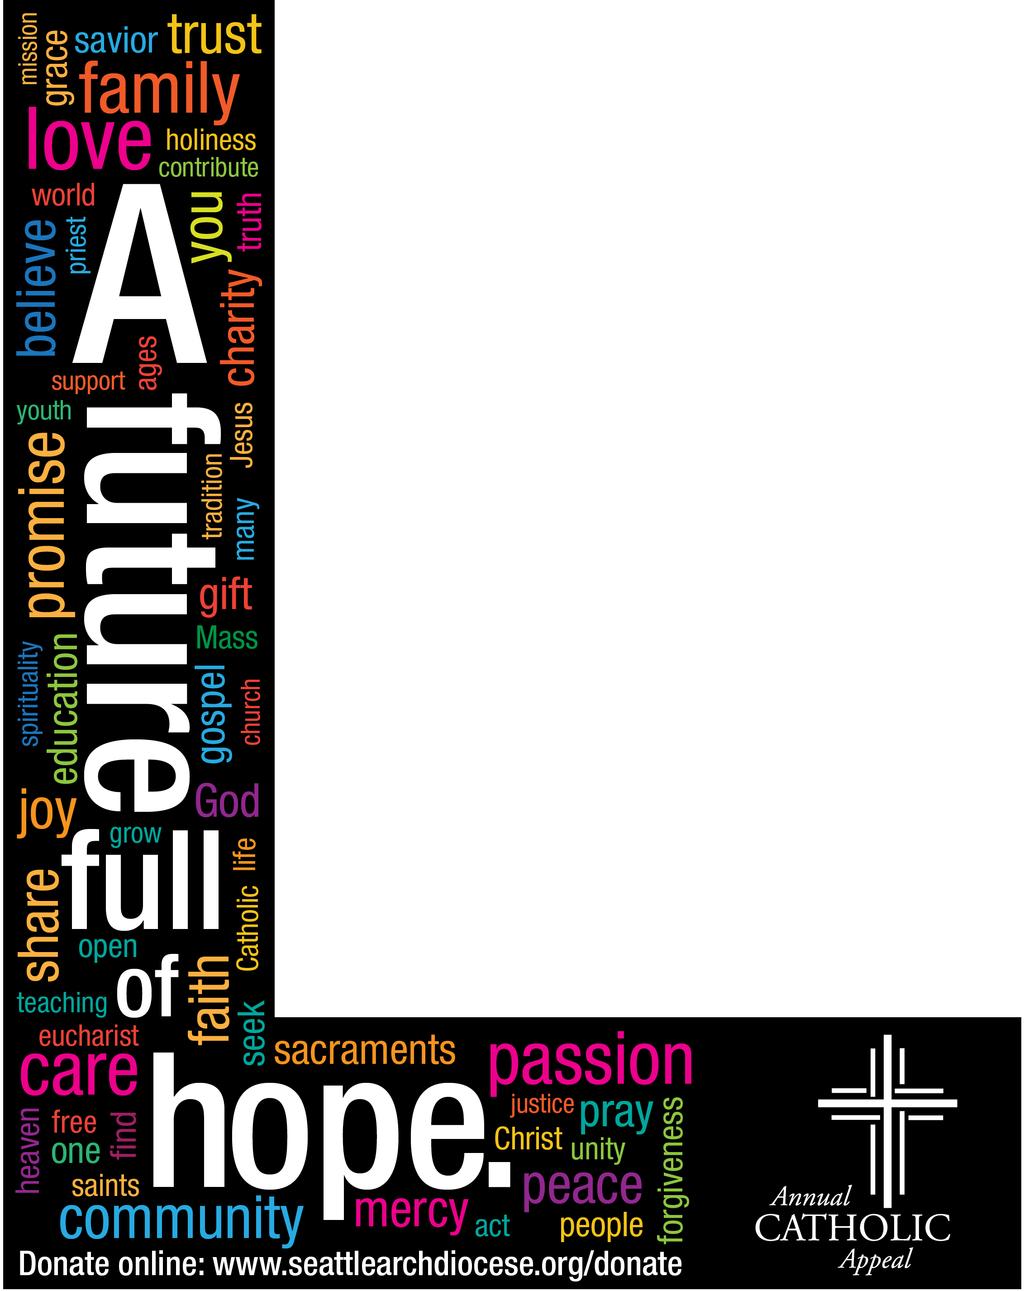 Our Community Annual Catholic Appeal: A Gift that Keeps Giving THANK YOU to those who have contributed to 2015 Annual Catholic Appeal (ACA). The ACA gives St.